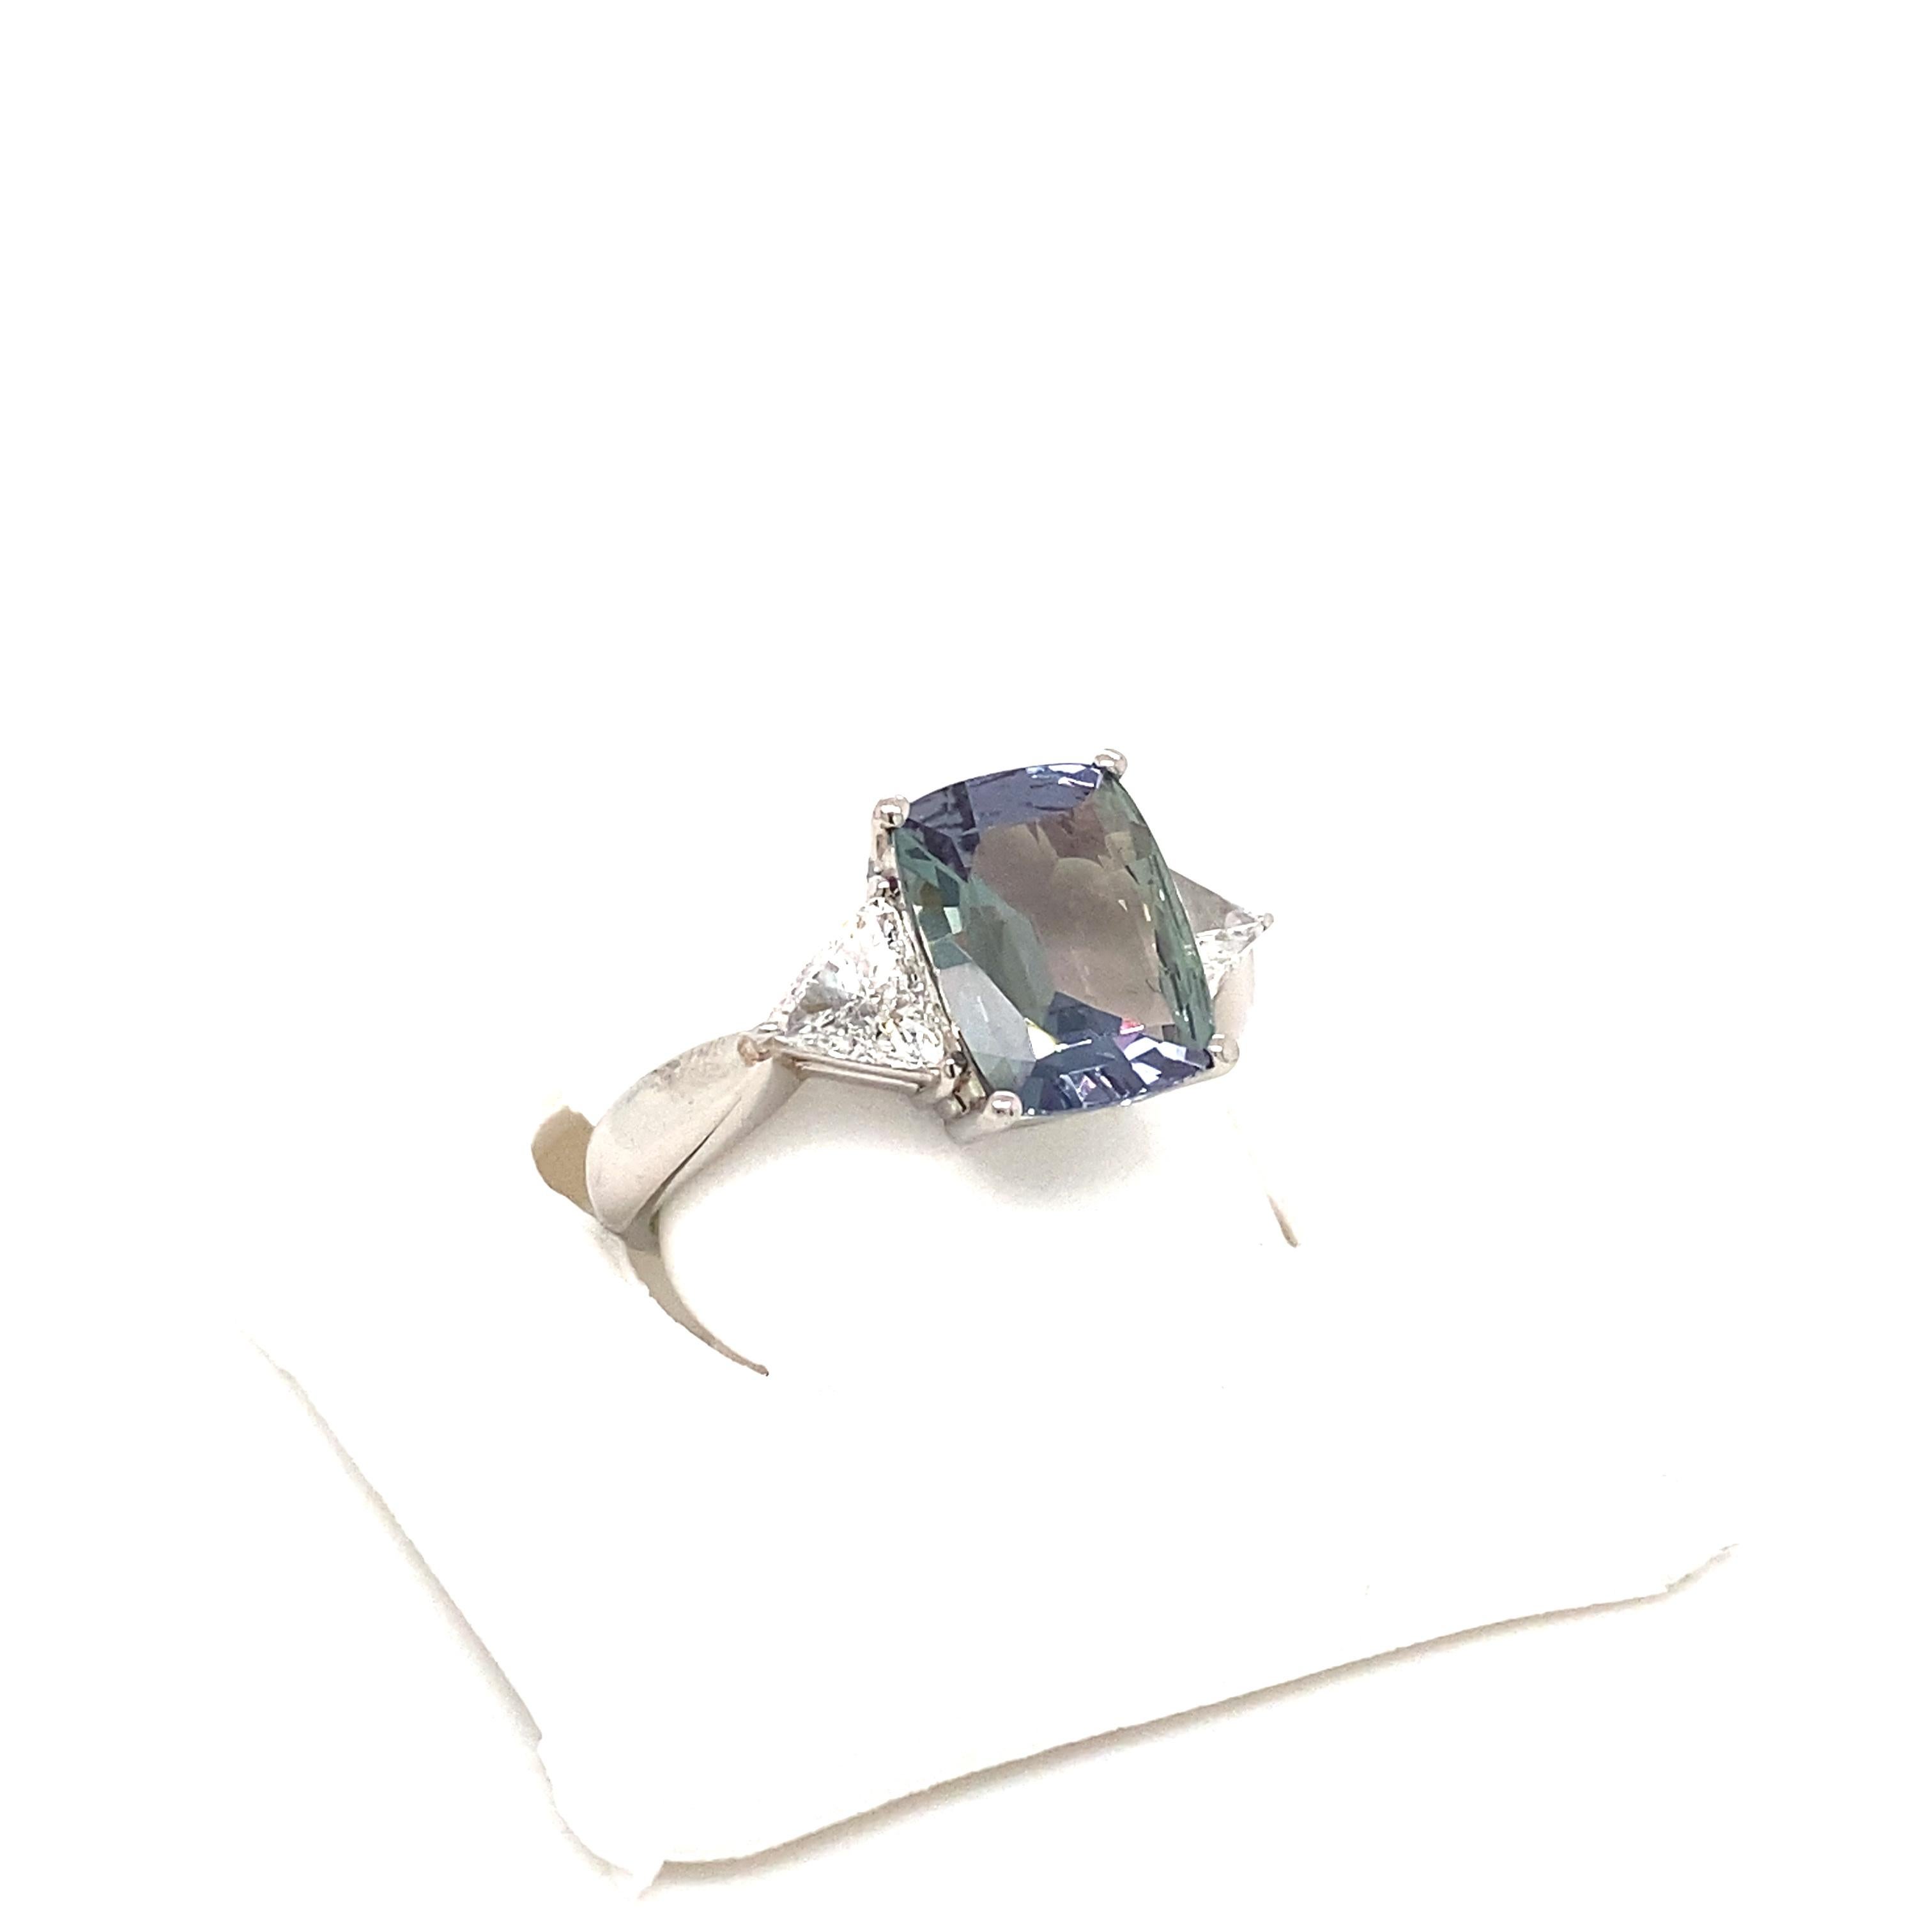 This is a gorgeous natural AAA quality cushion Alexandrite surrounded by dainty diamonds that is set in a vintage platinum setting. This ring features a natural 3.12 carat cushion brazilian alexandrite that is certified by the Gemological Institute